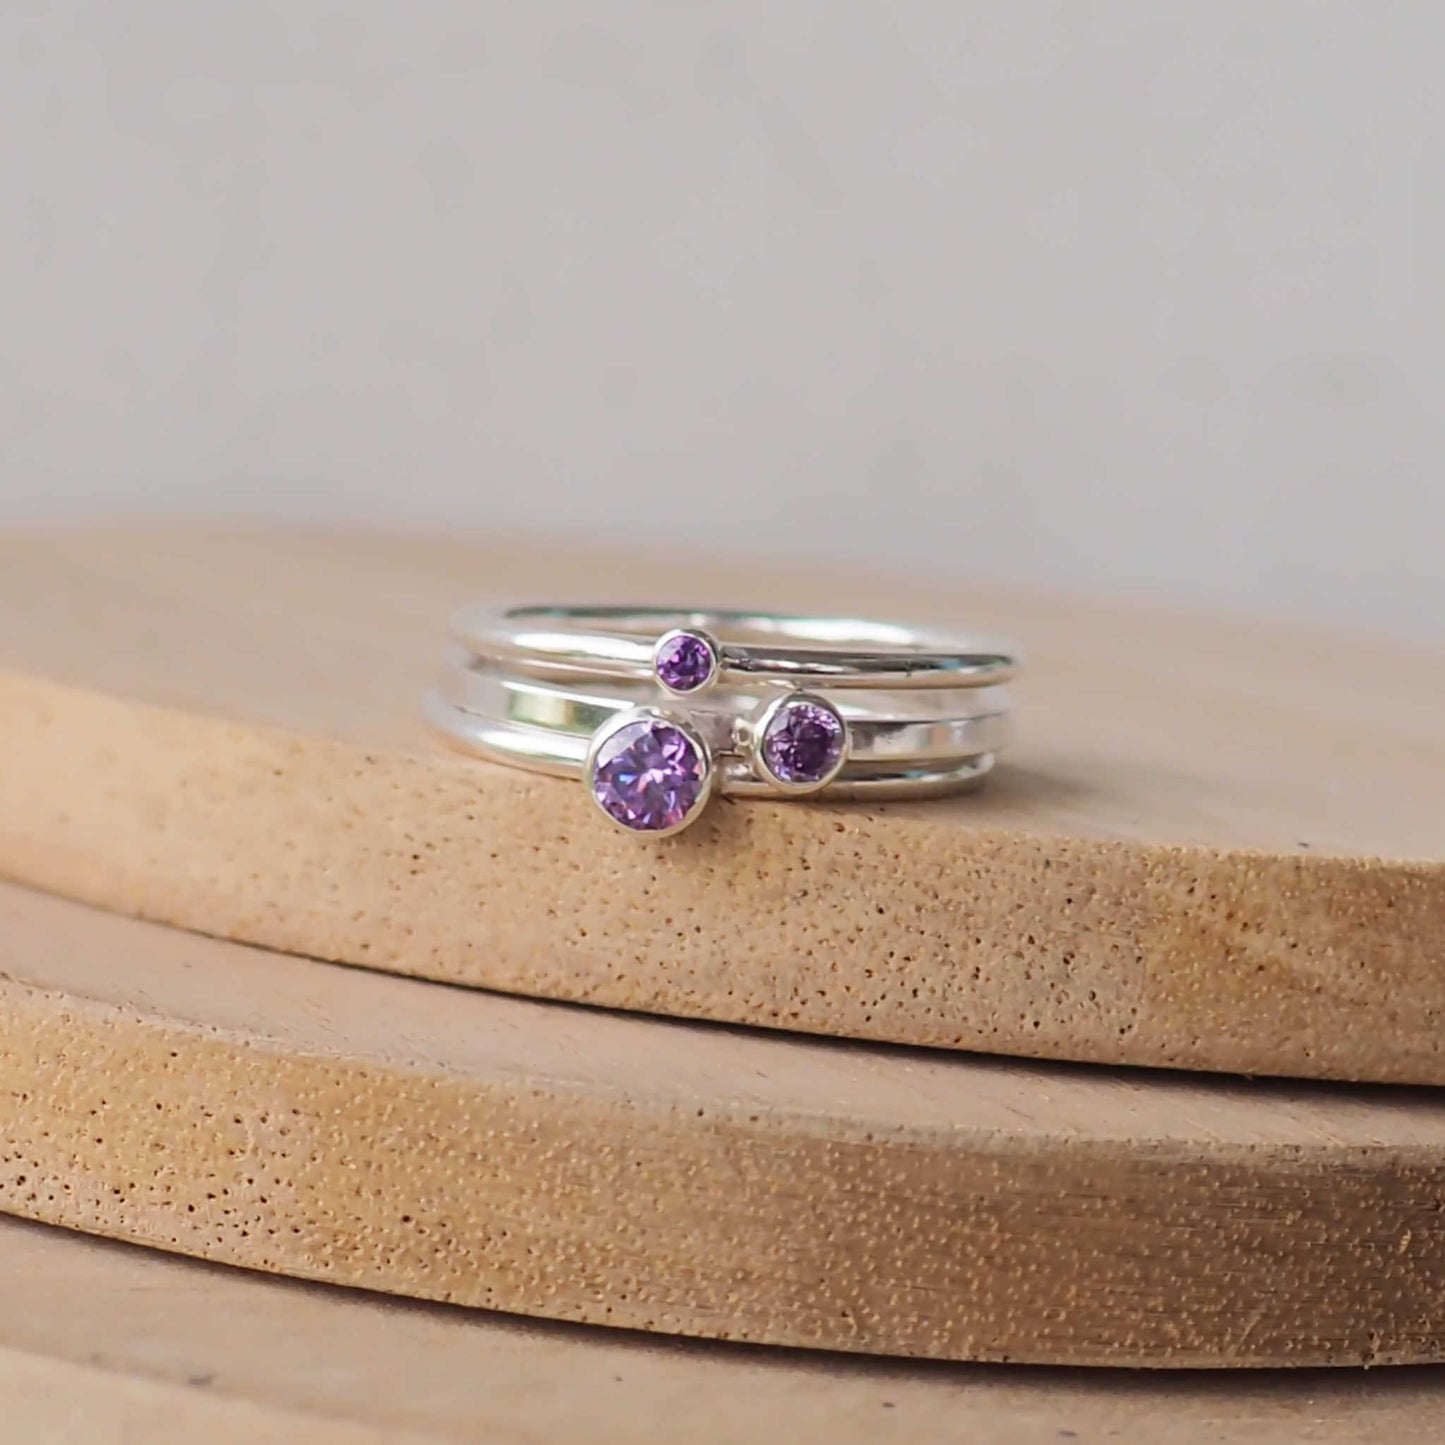 Set of three Purple amethyst silver rings with round gemstones in different sizes. Made from Cubic Zirconia and Sterling Silver.  Handmade in Scotland UK by maram jewellery